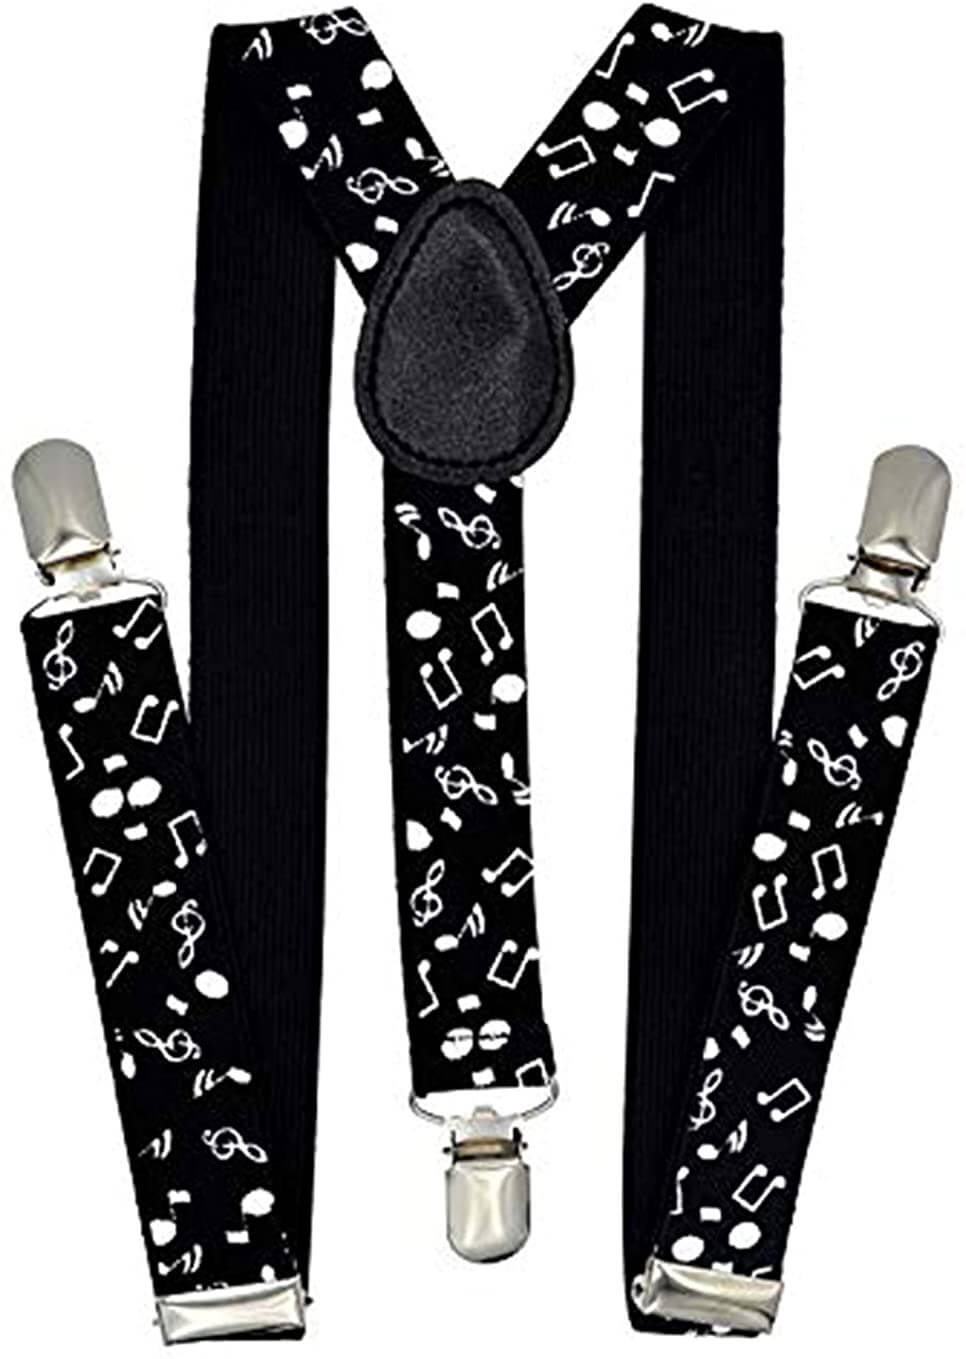 Suspenders for Boys Kids Girls and Toddlers - Adjustable Elastic 1 inch Wide Y Shape Suspender Strong Clips